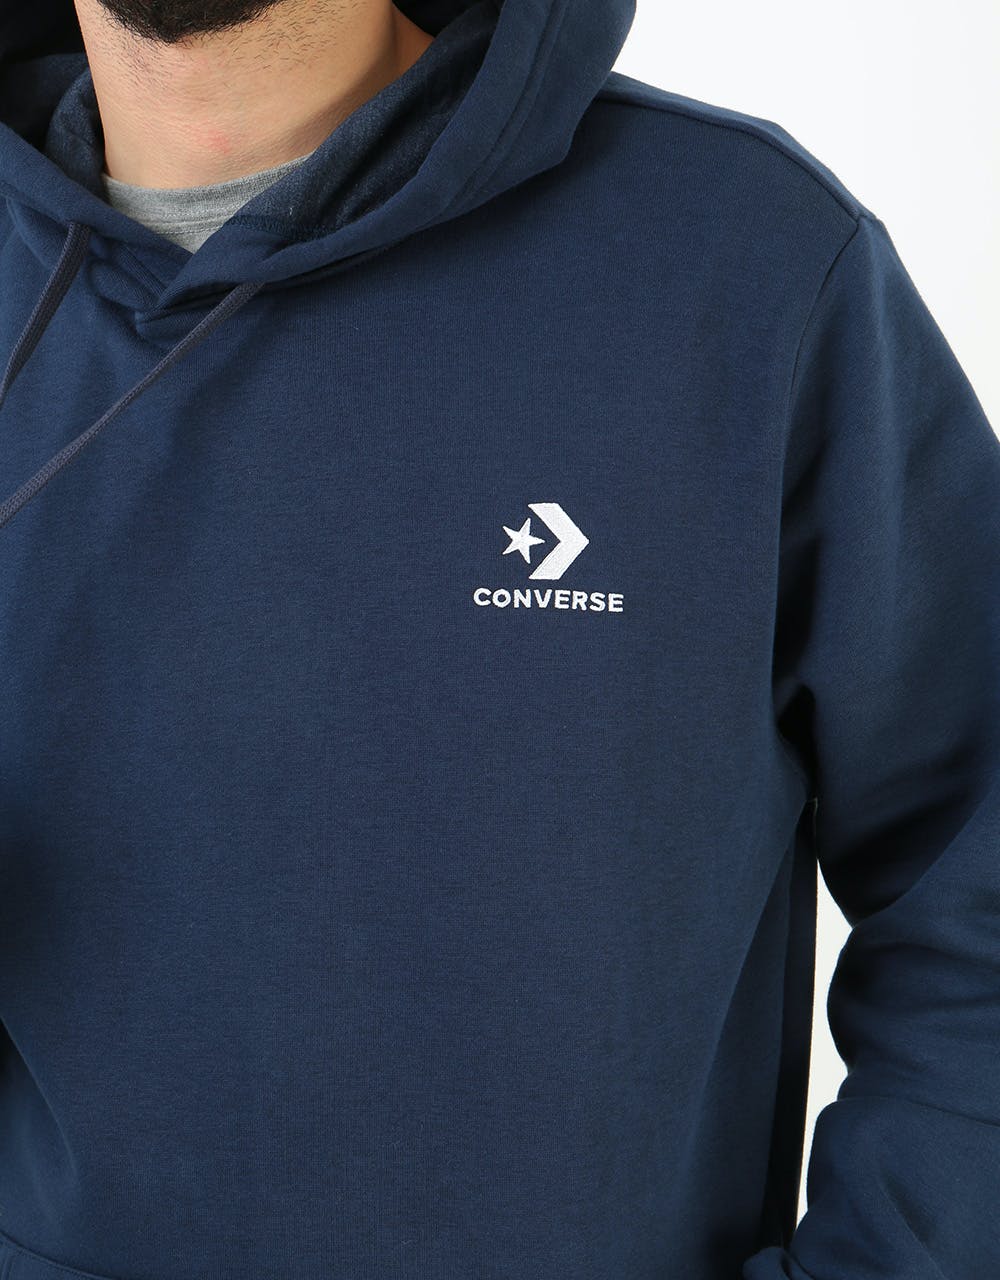 Converse Star Chevron Embroidered Pullover Hoodie - Obsidian